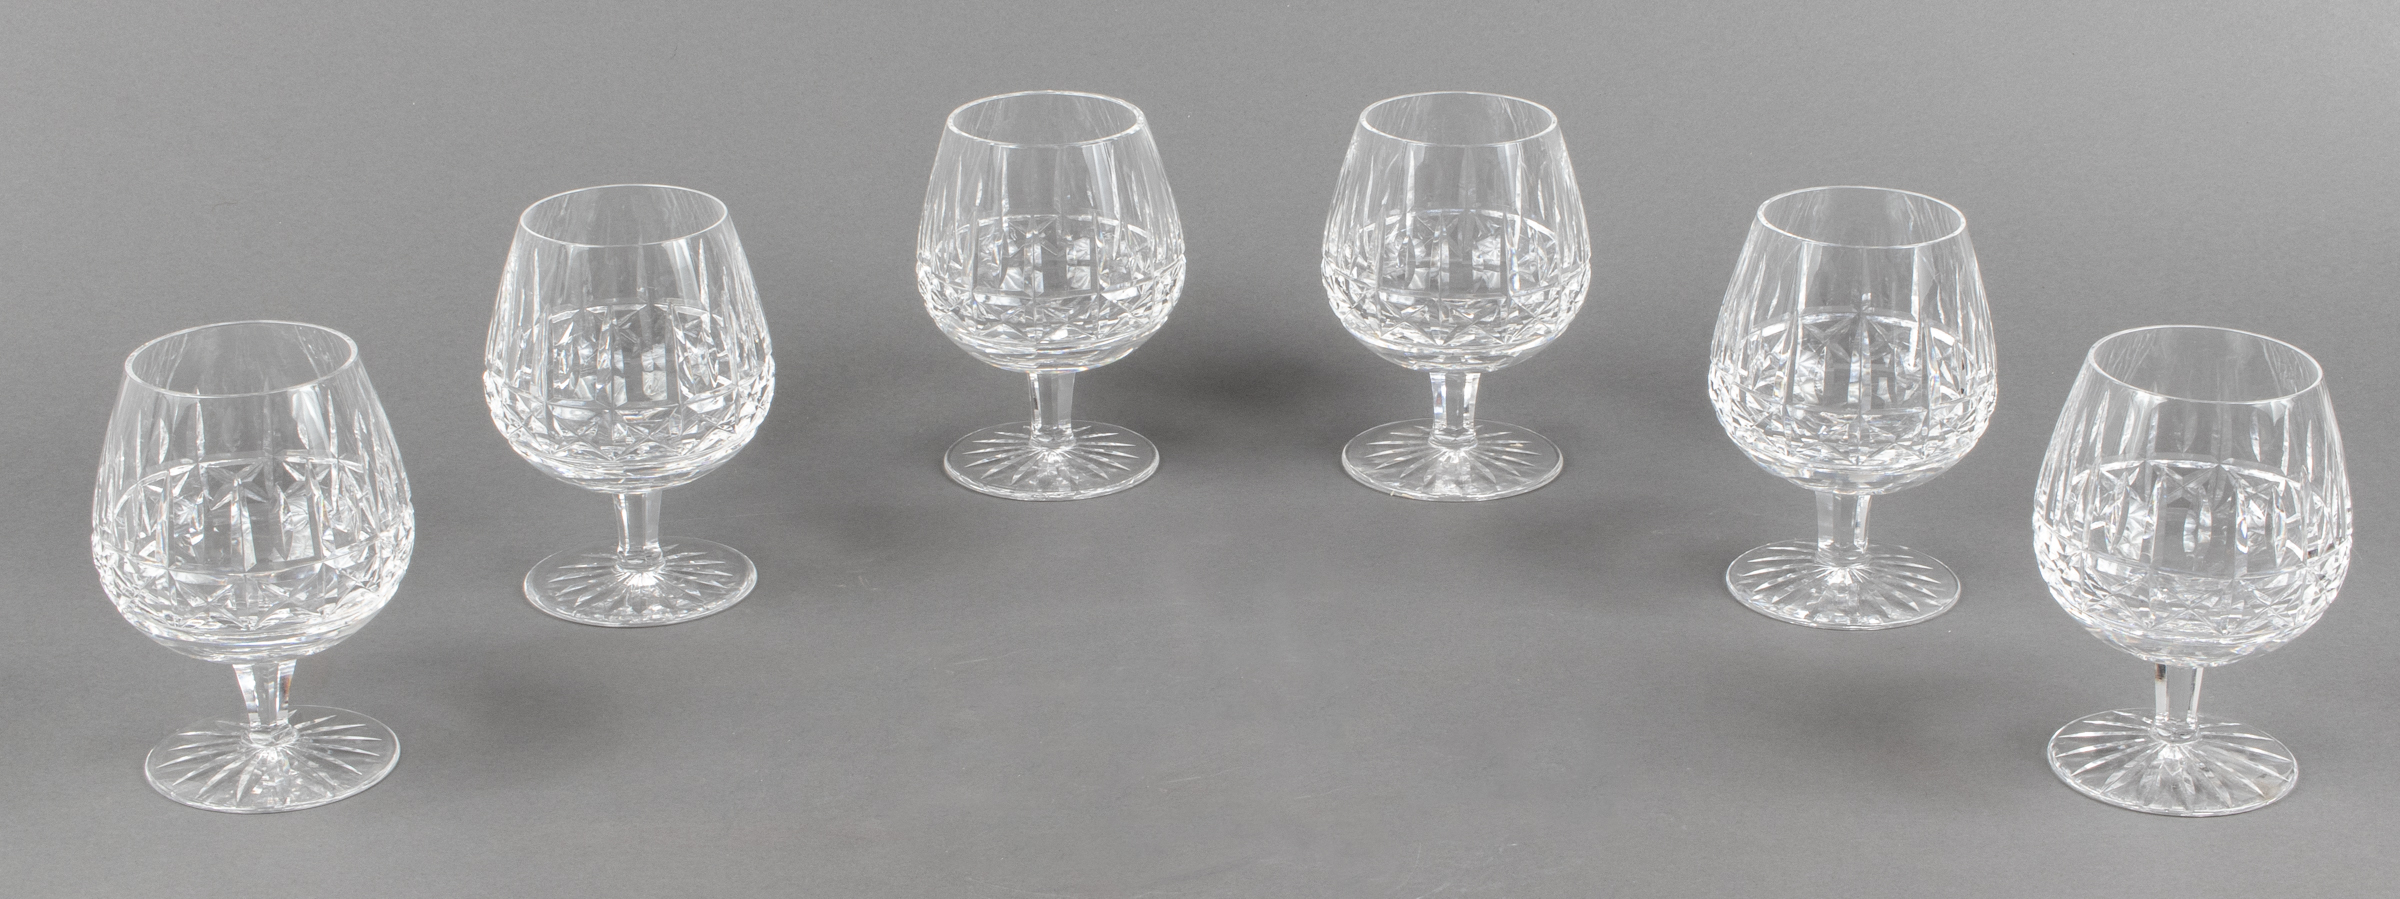 WATERFORD CUT GLASS BRANDY SNIFTERS  3c3543